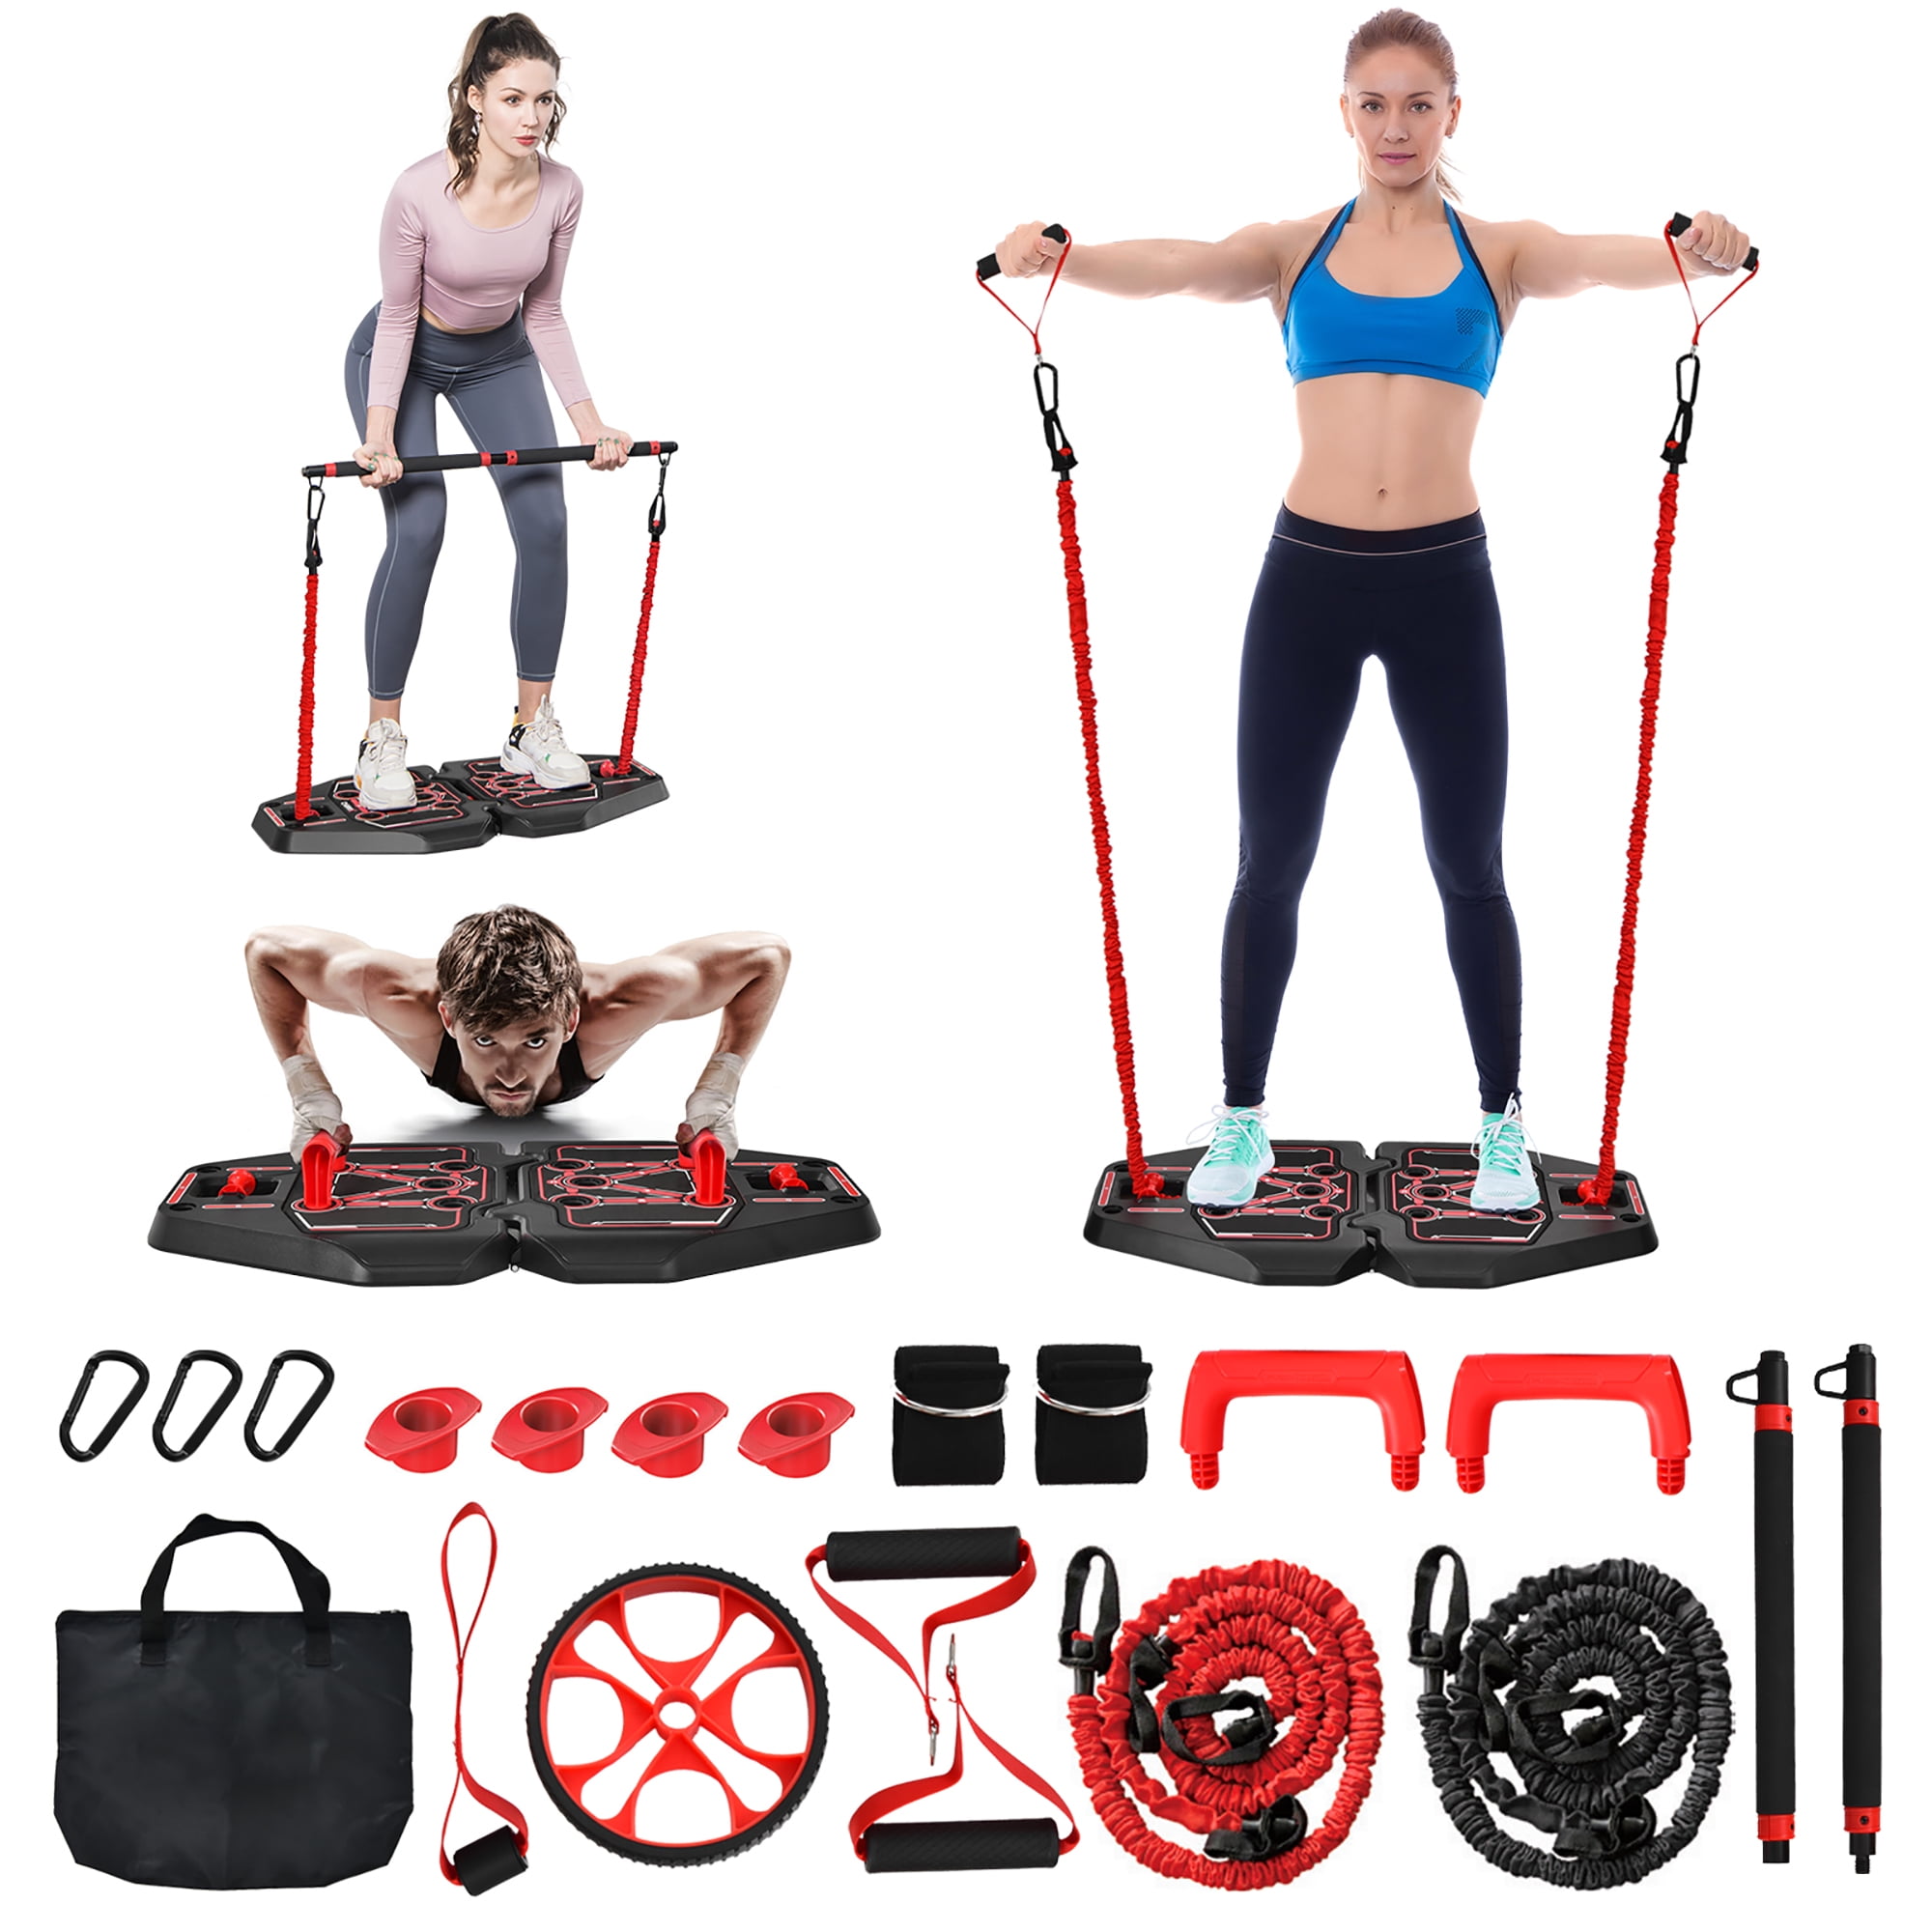 Best Equipment For a Quick Full Body Workout